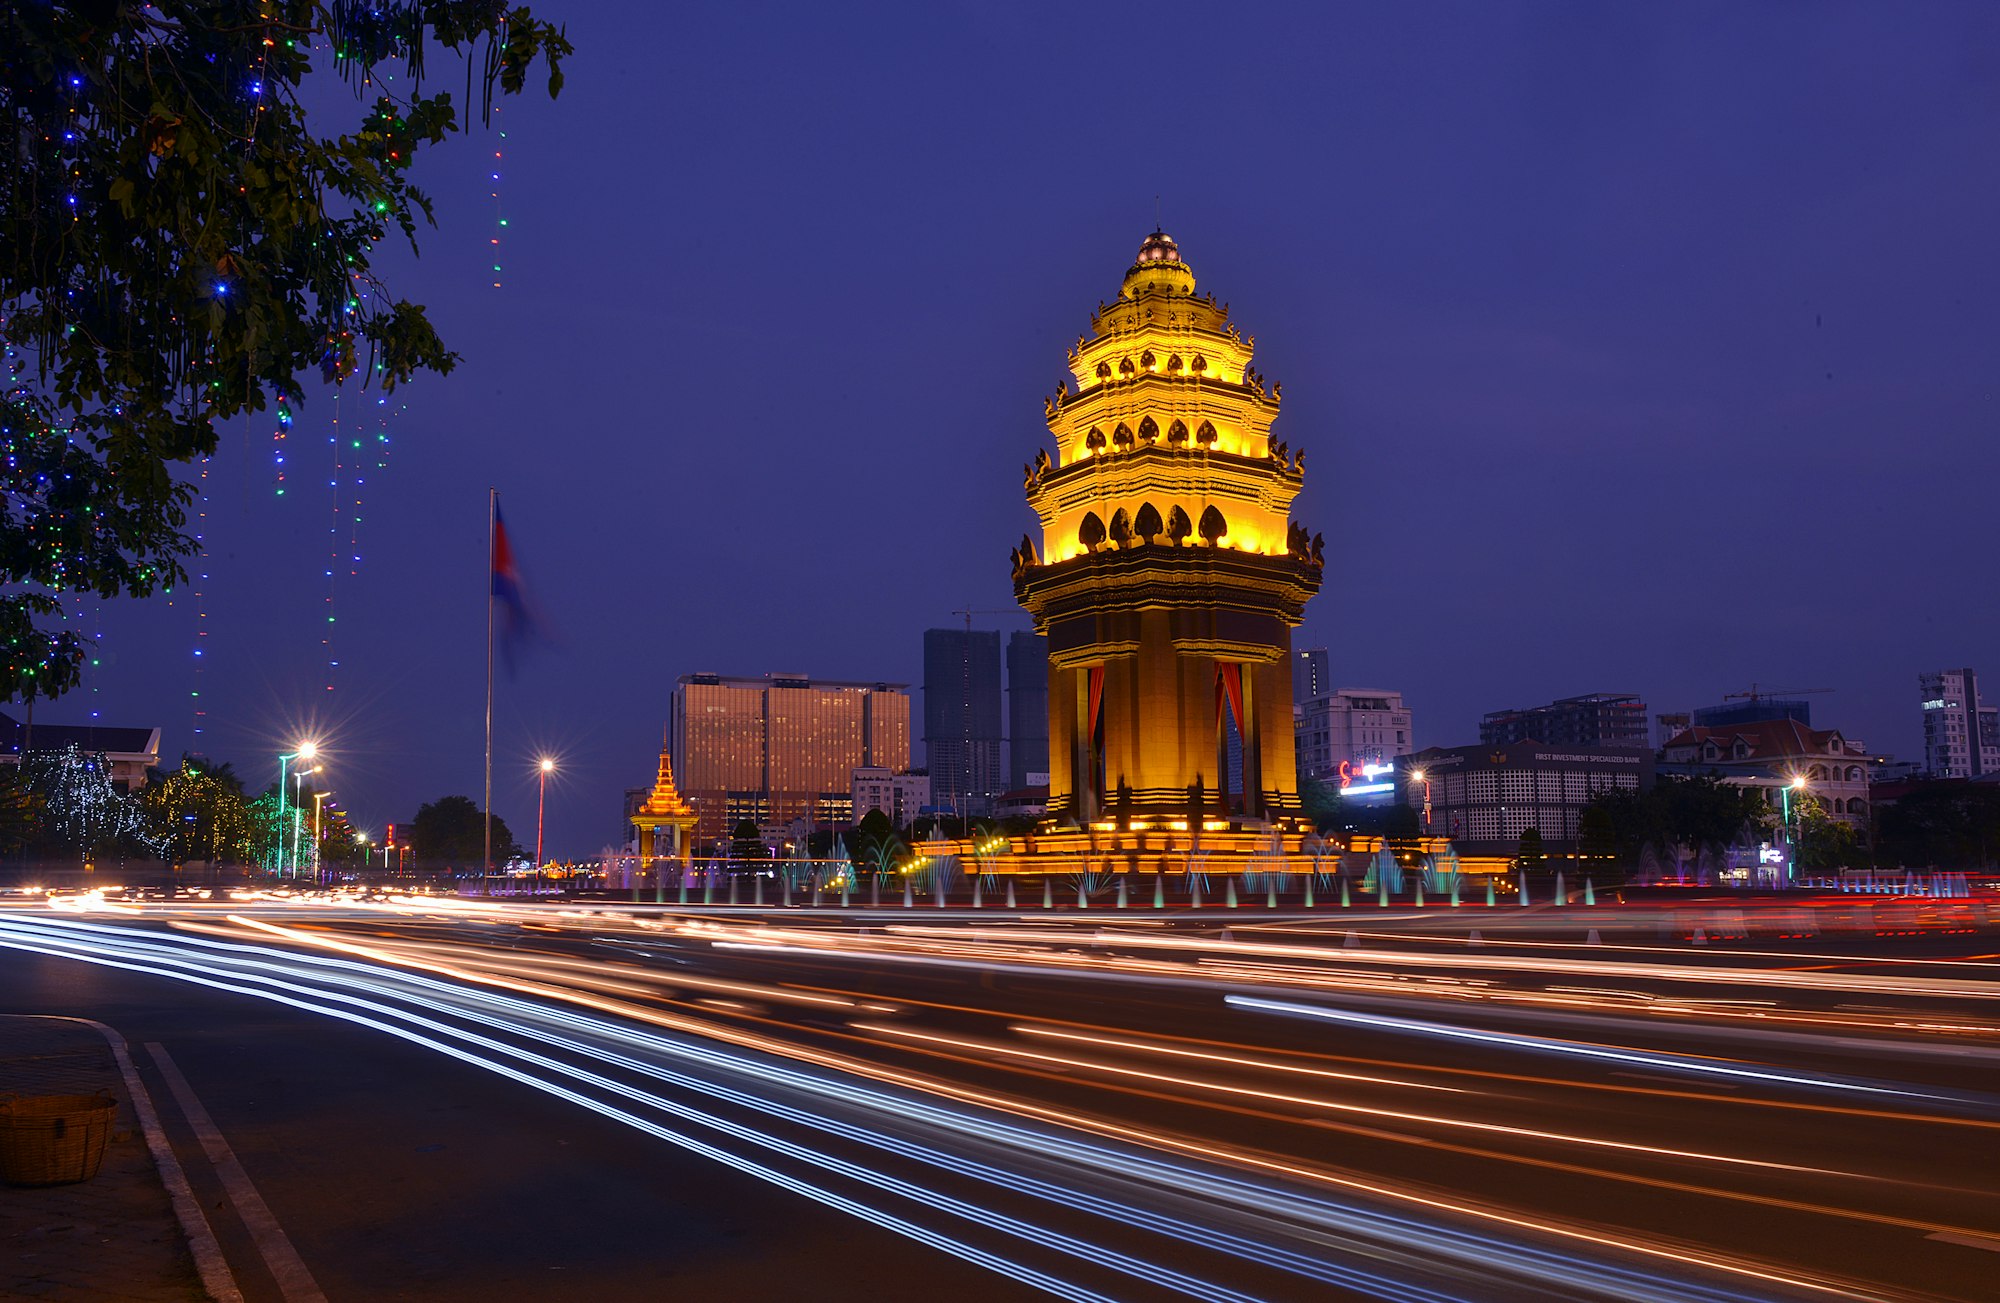 The Best 10 Things to Do in Phnom Penh